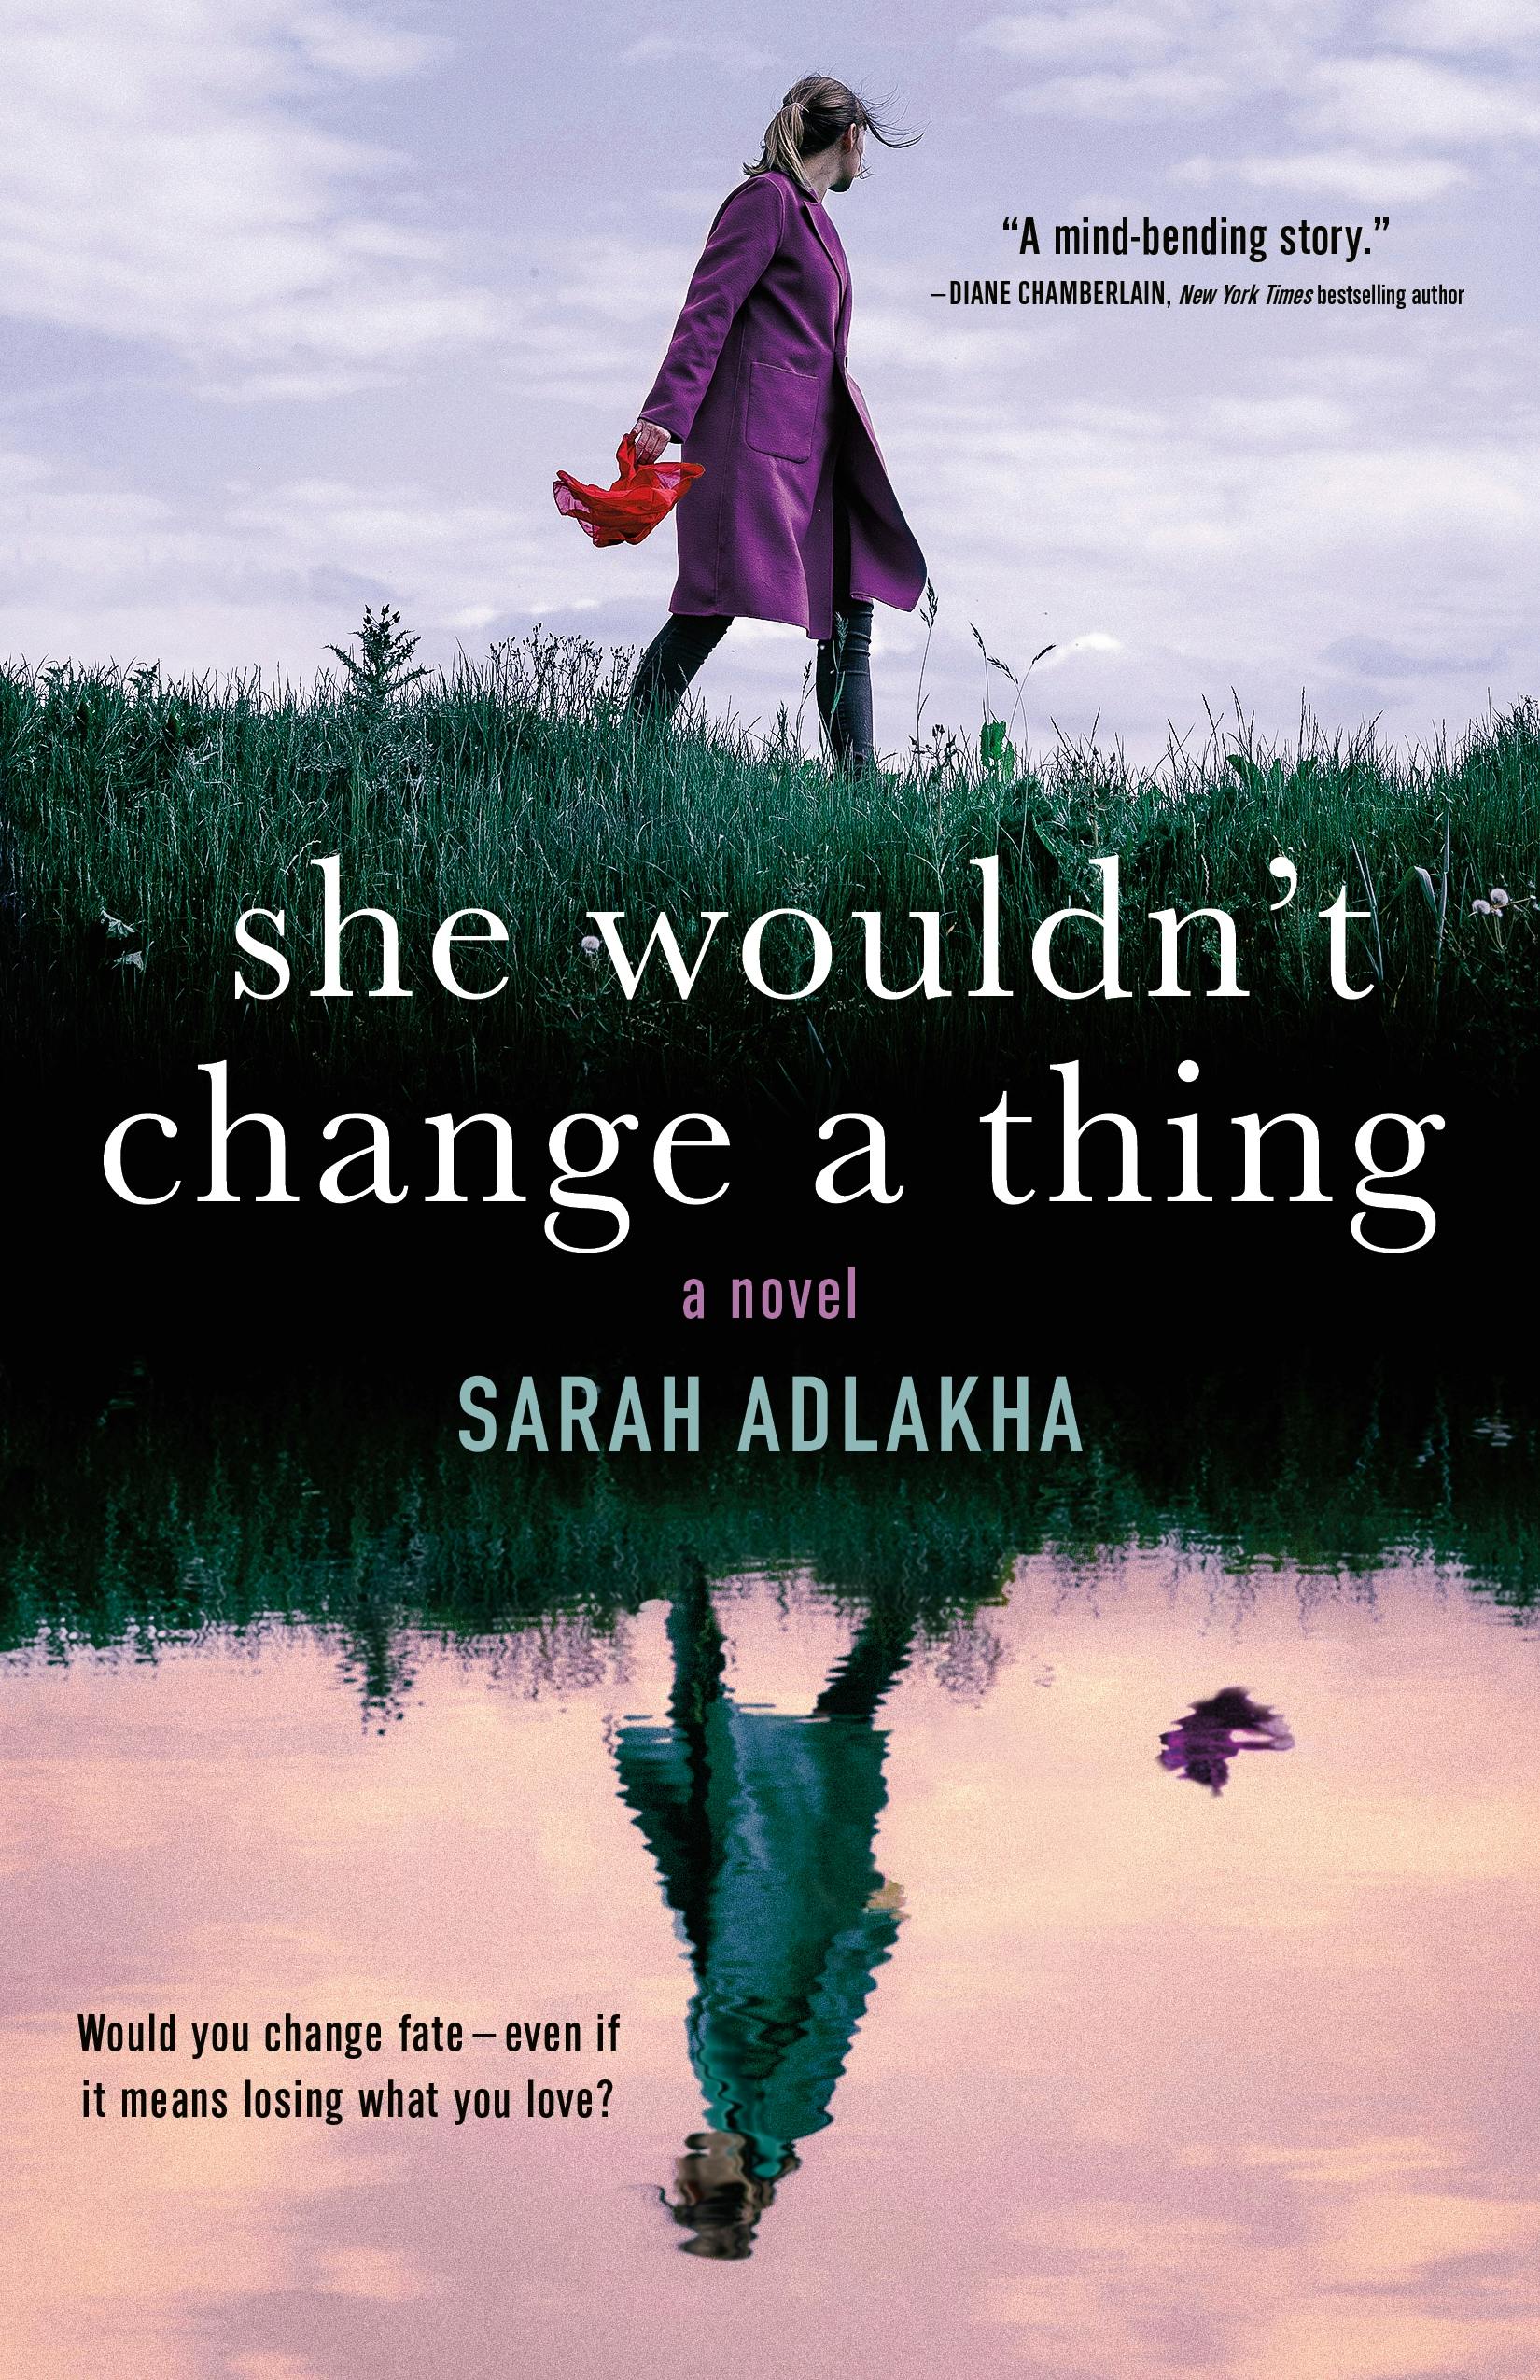 Cover for the book titled as: She Wouldn't Change a Thing